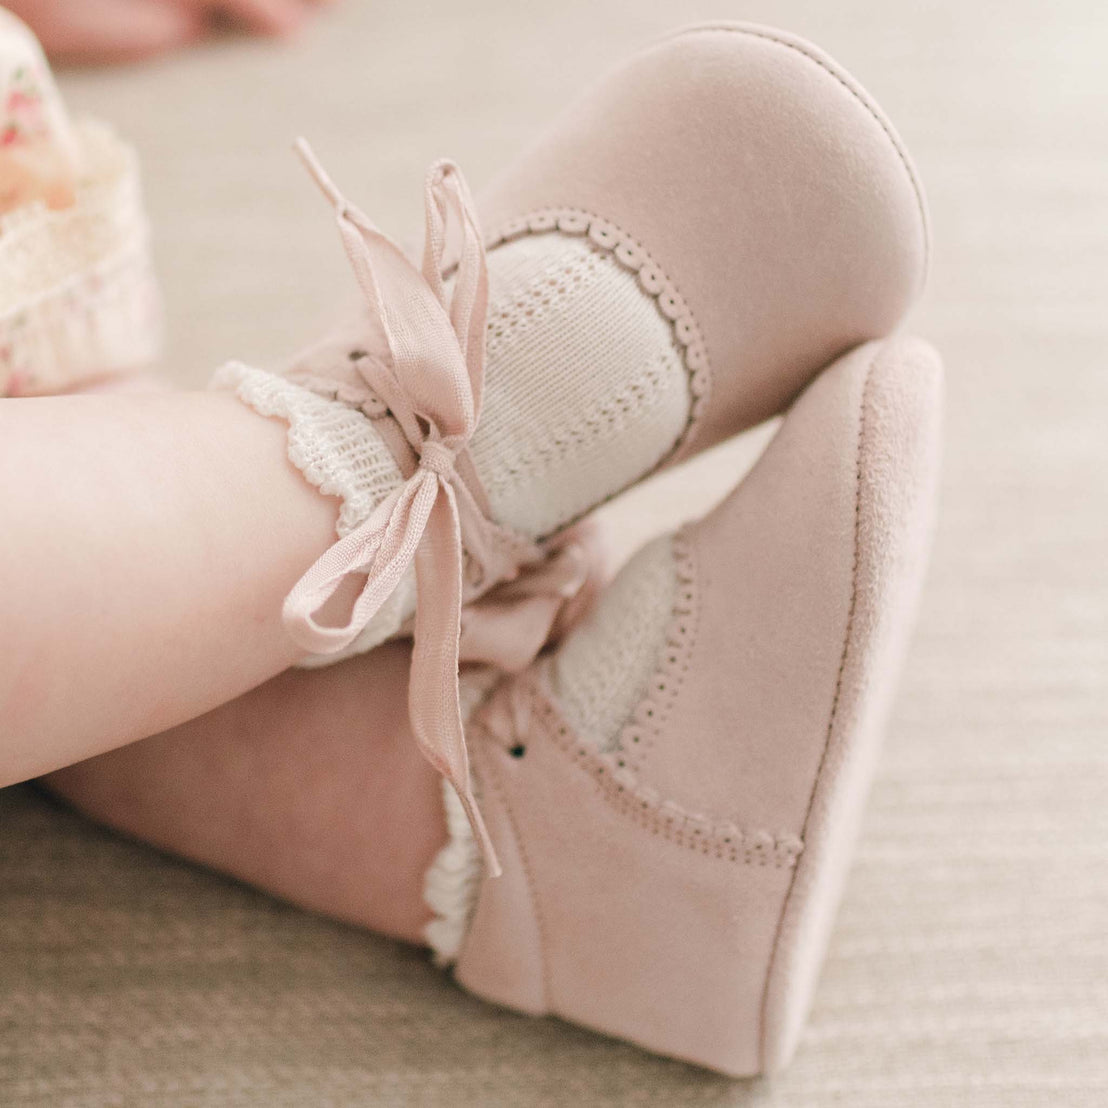 Close-up of a baby's feet wearing the pink Thea Suede Tie Mary Janes with ribbon ties and Pattern Socks, resting on a soft beige surface.